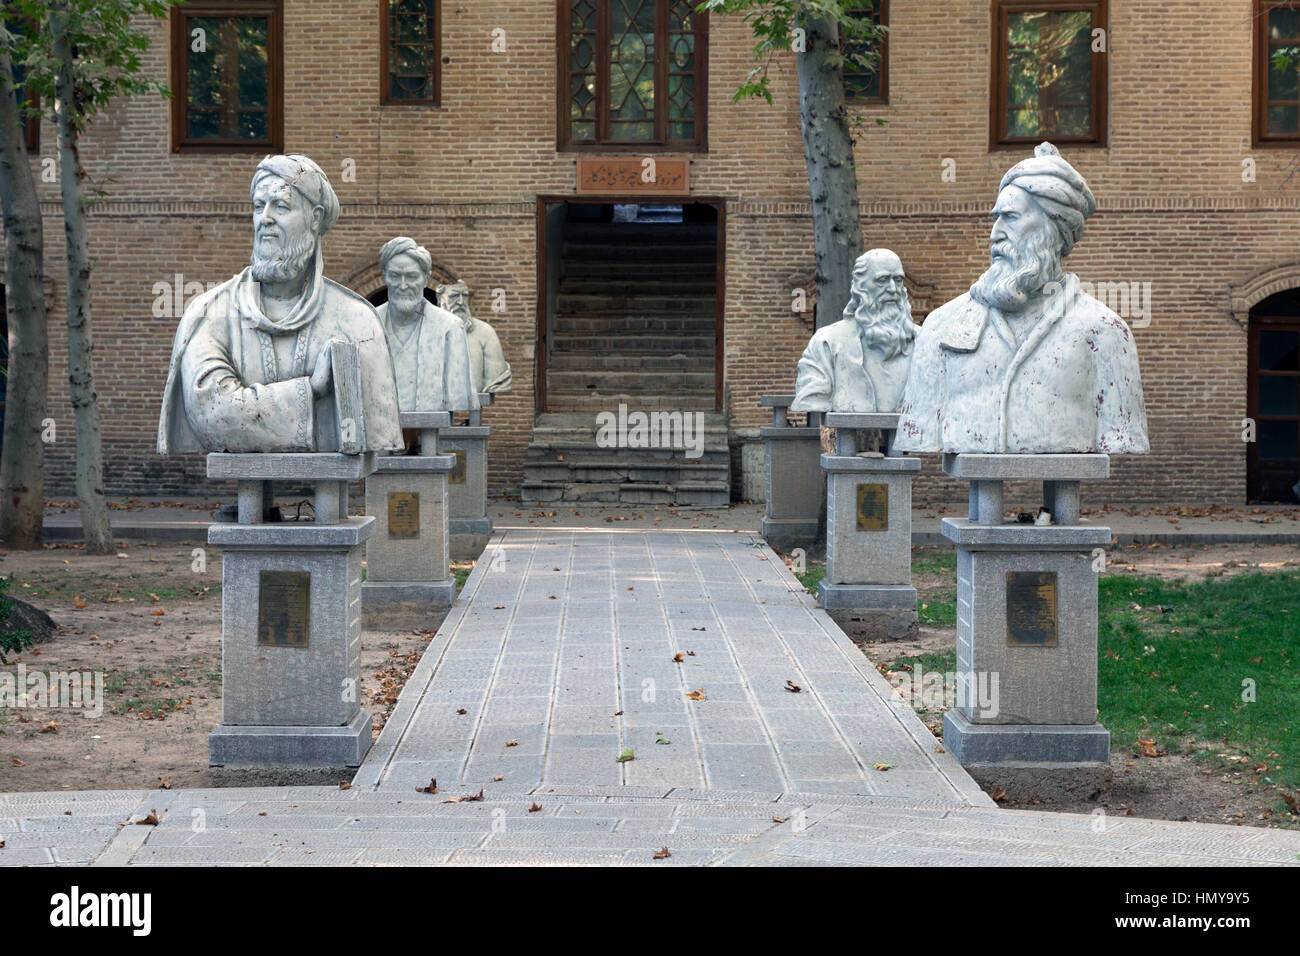 Statues of Iranian famous poets and scientists in Sa'dabad park, Tehran Stock Photo